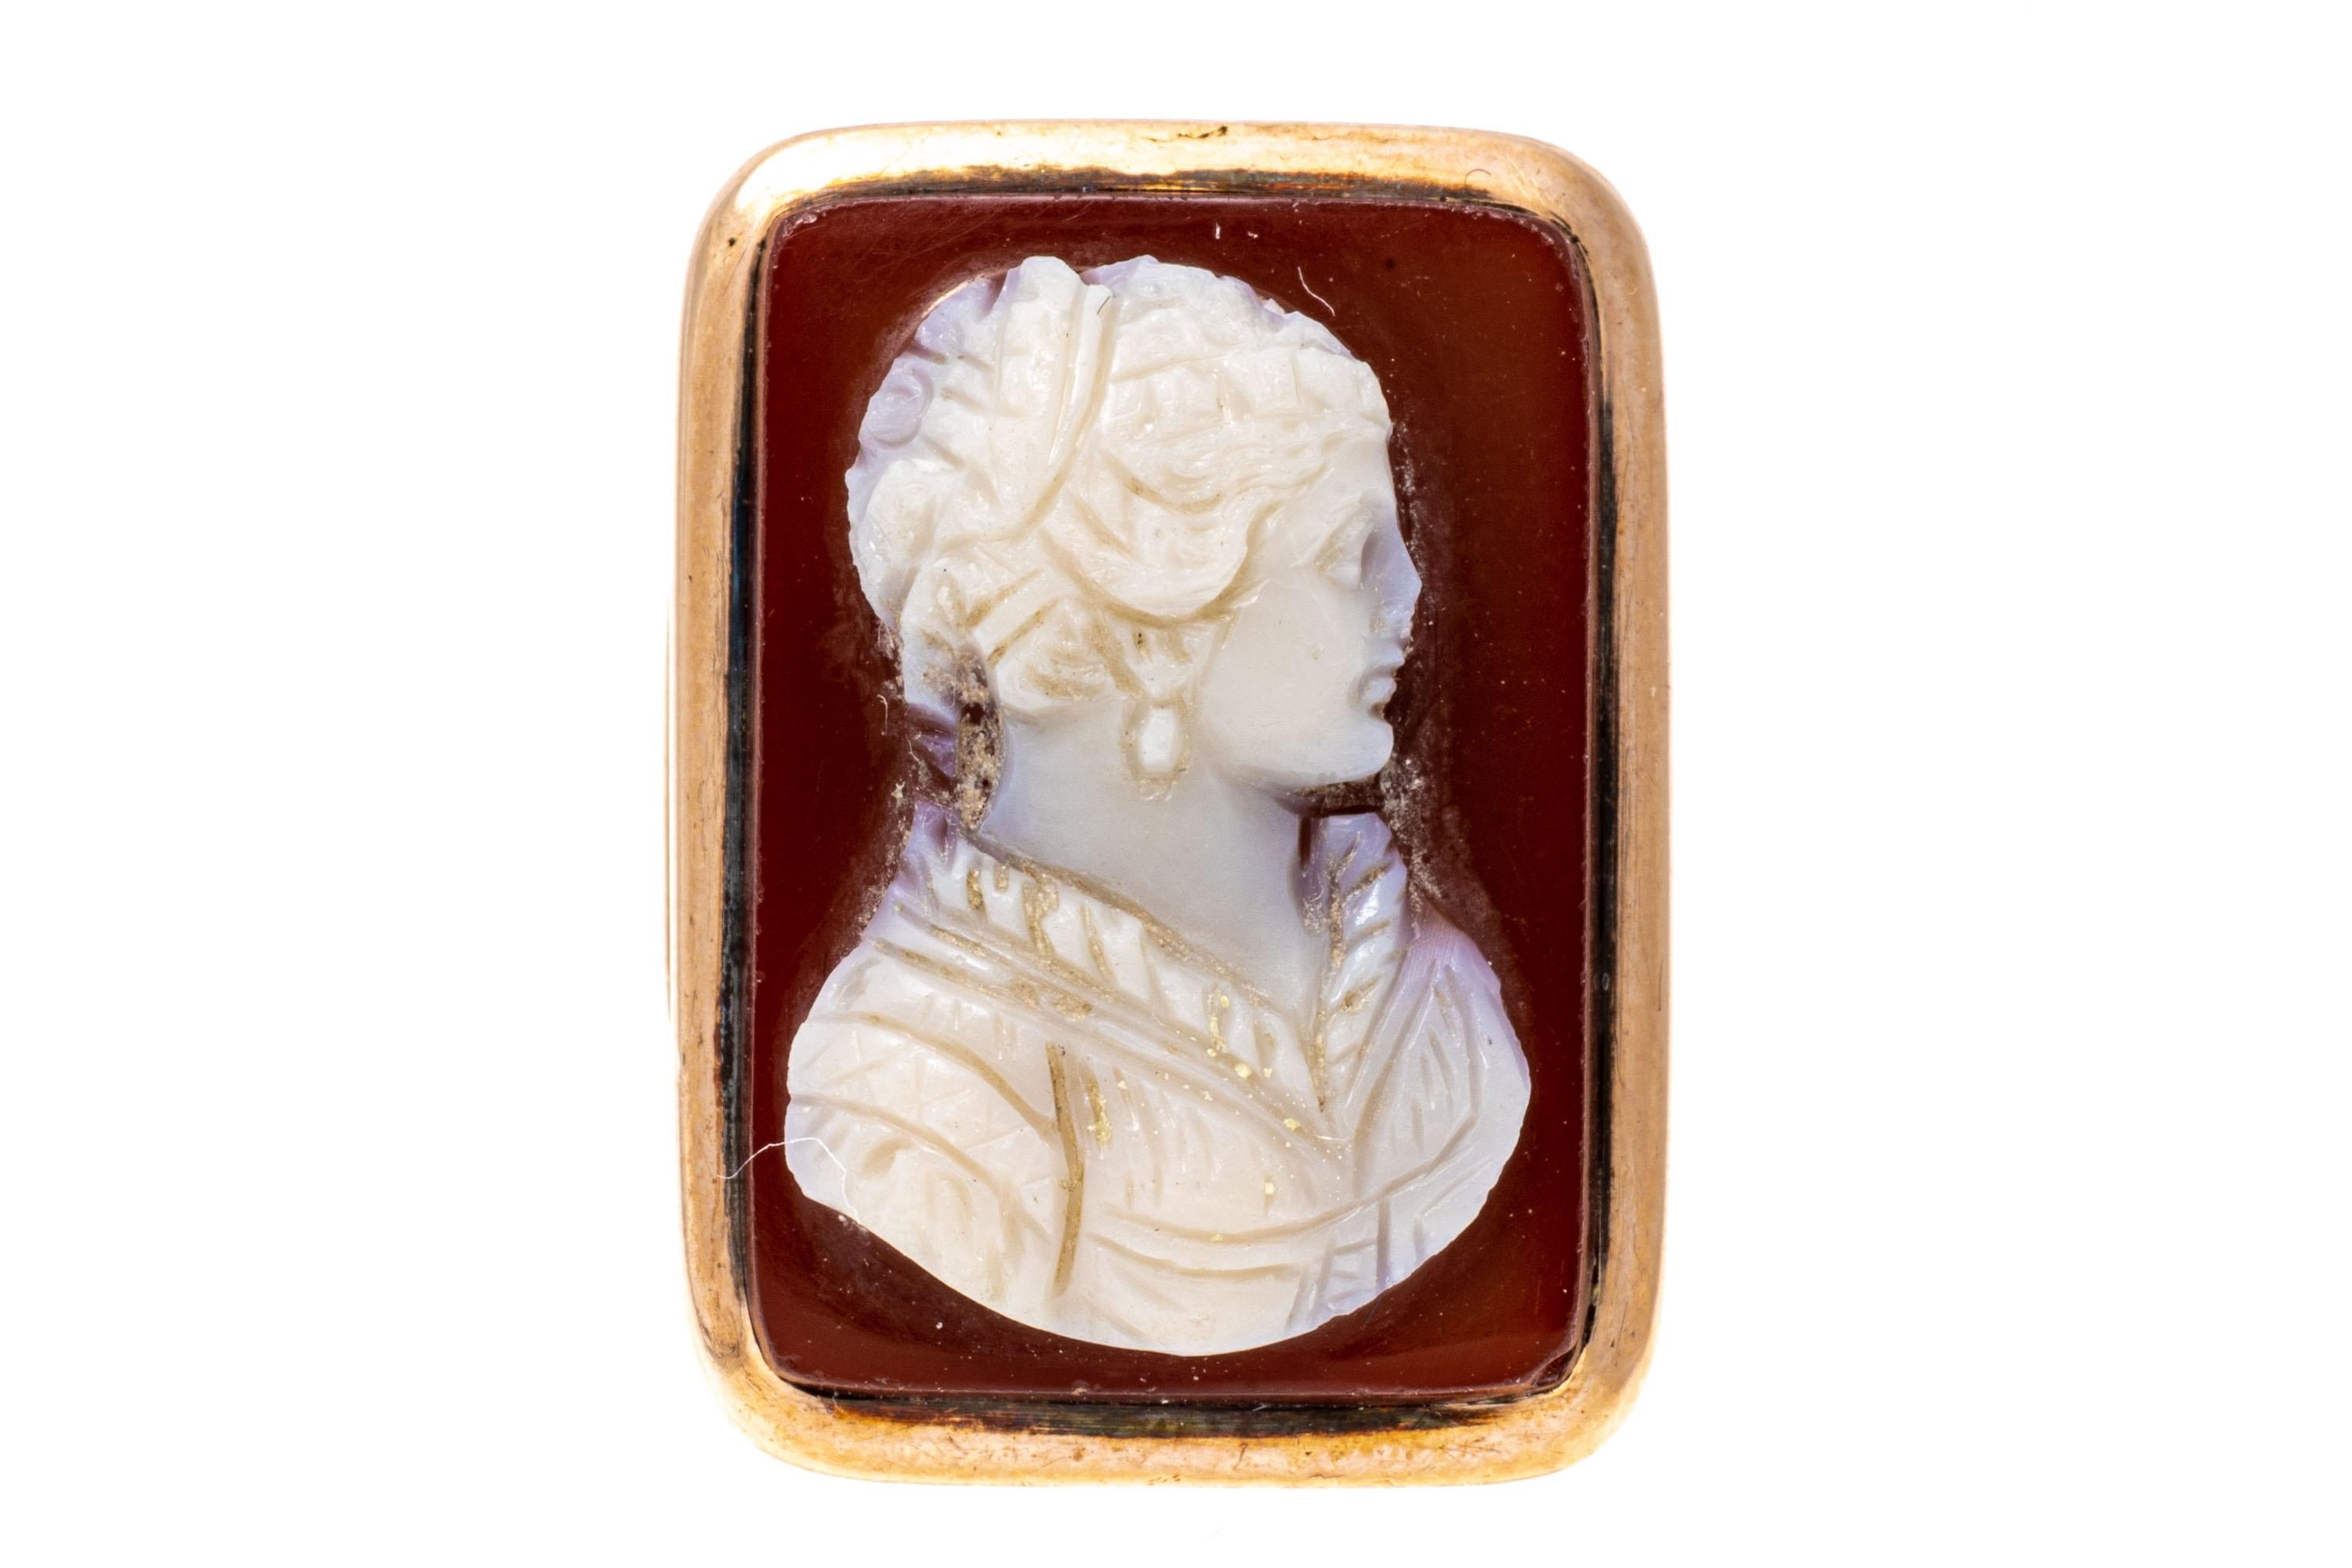 12k rose gold ring. This lovely antique rectangular cameo ring has an orange background with a creamy white foreground of a handsome profile bust, facing to the right, and decorated with a pendant earrings and intricate collar. The ring also has a